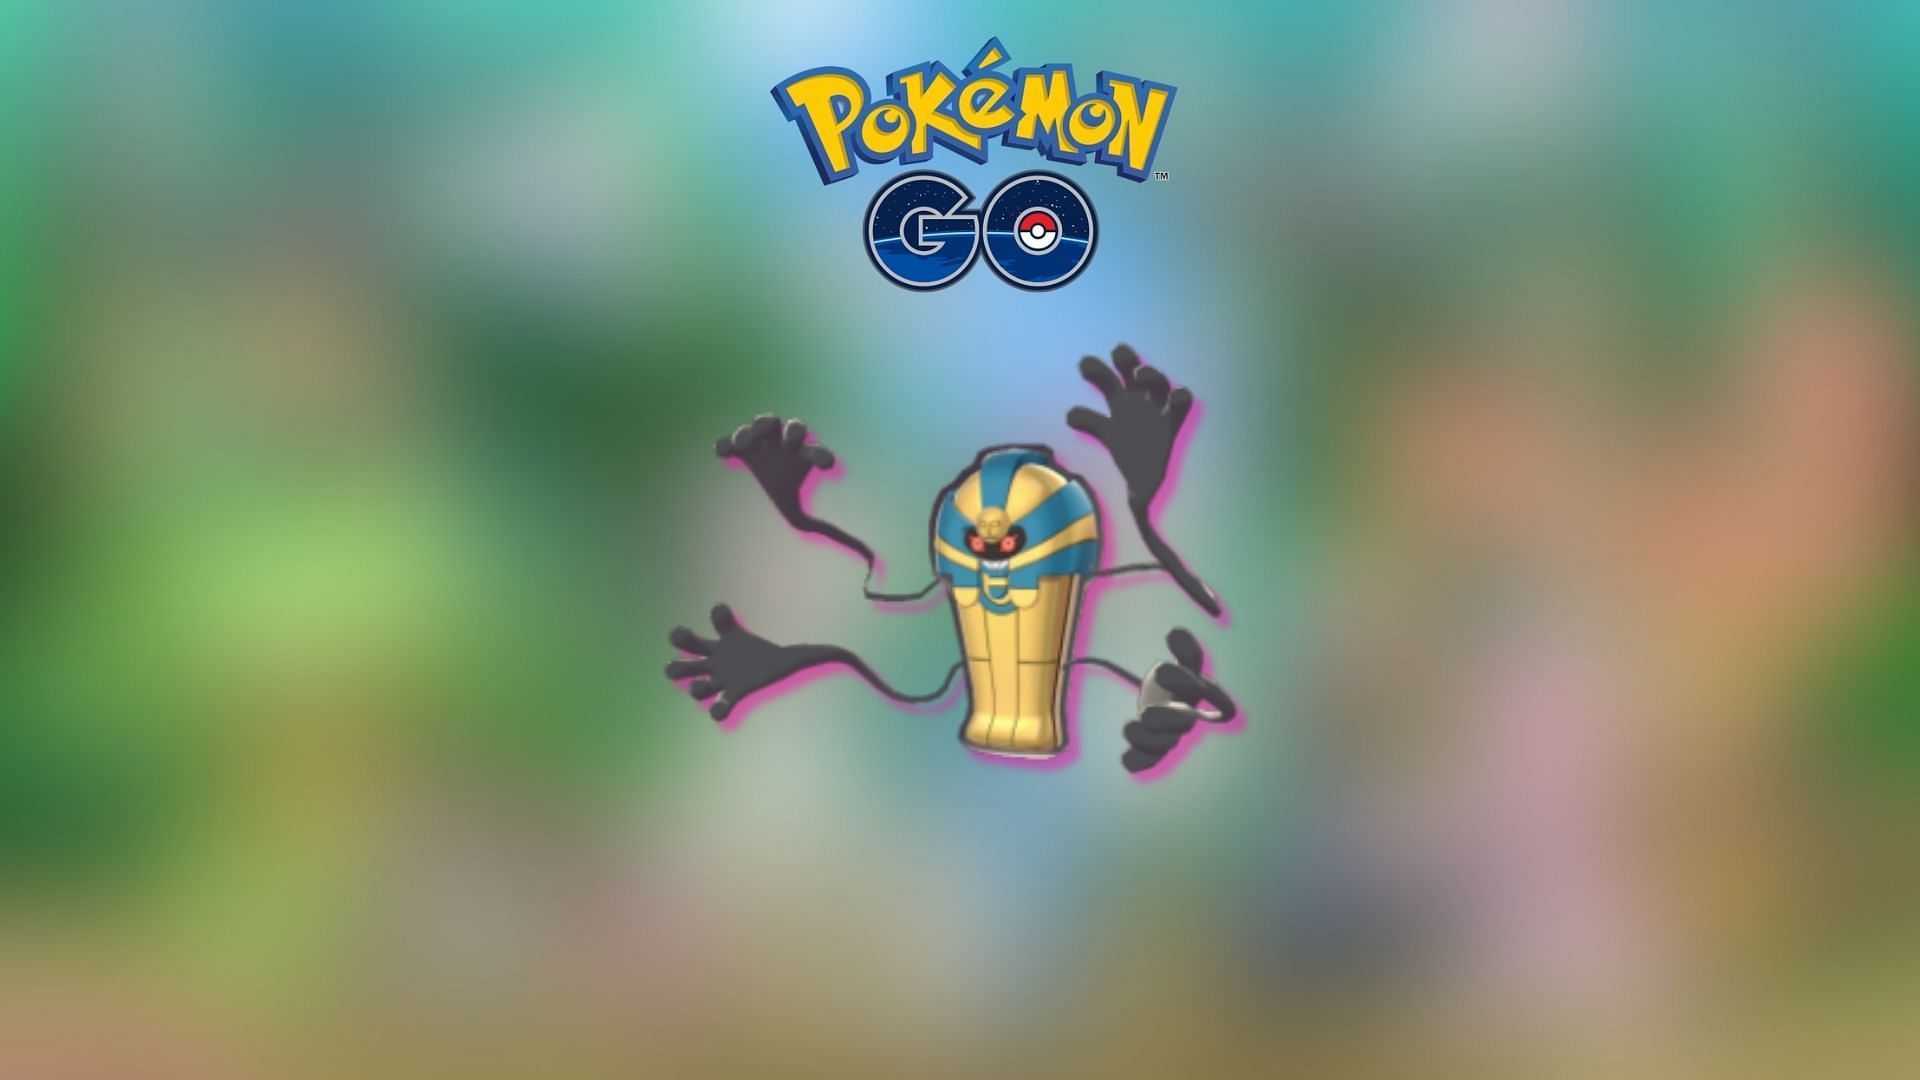 Pokemon GO Cofagrigus PvP and PvE guide: Best moveset, counters, and more